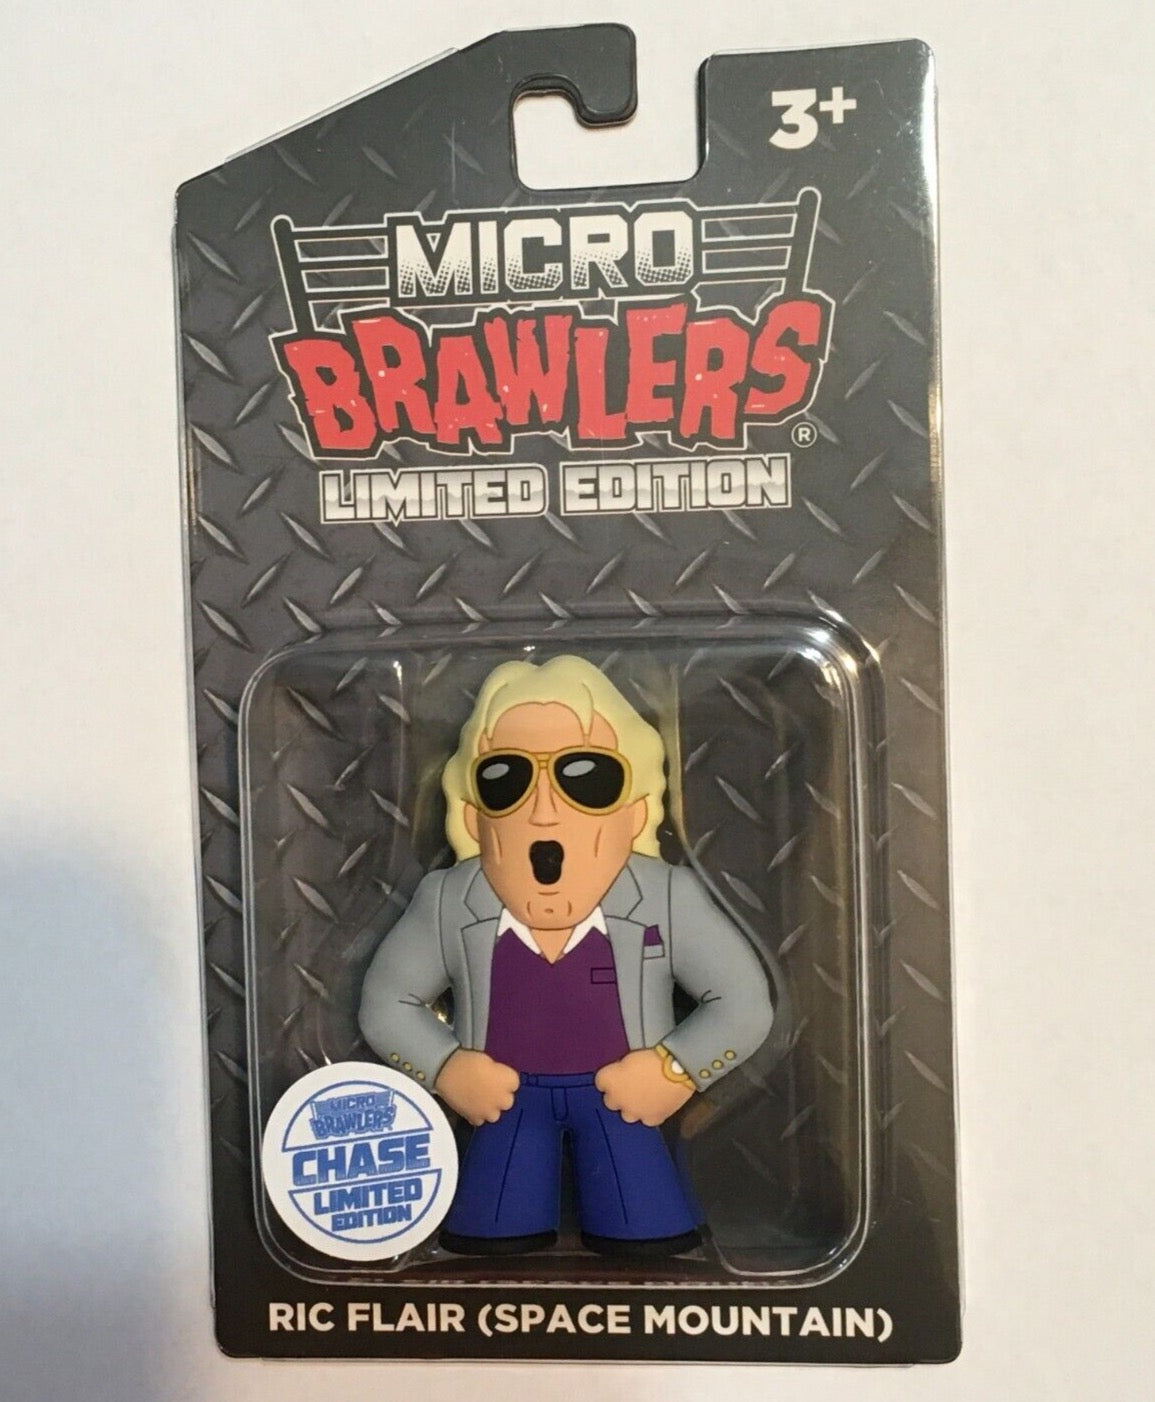 24 Hrs Only: Ric Flair Limousine Ridin Micro Brawler® + Space